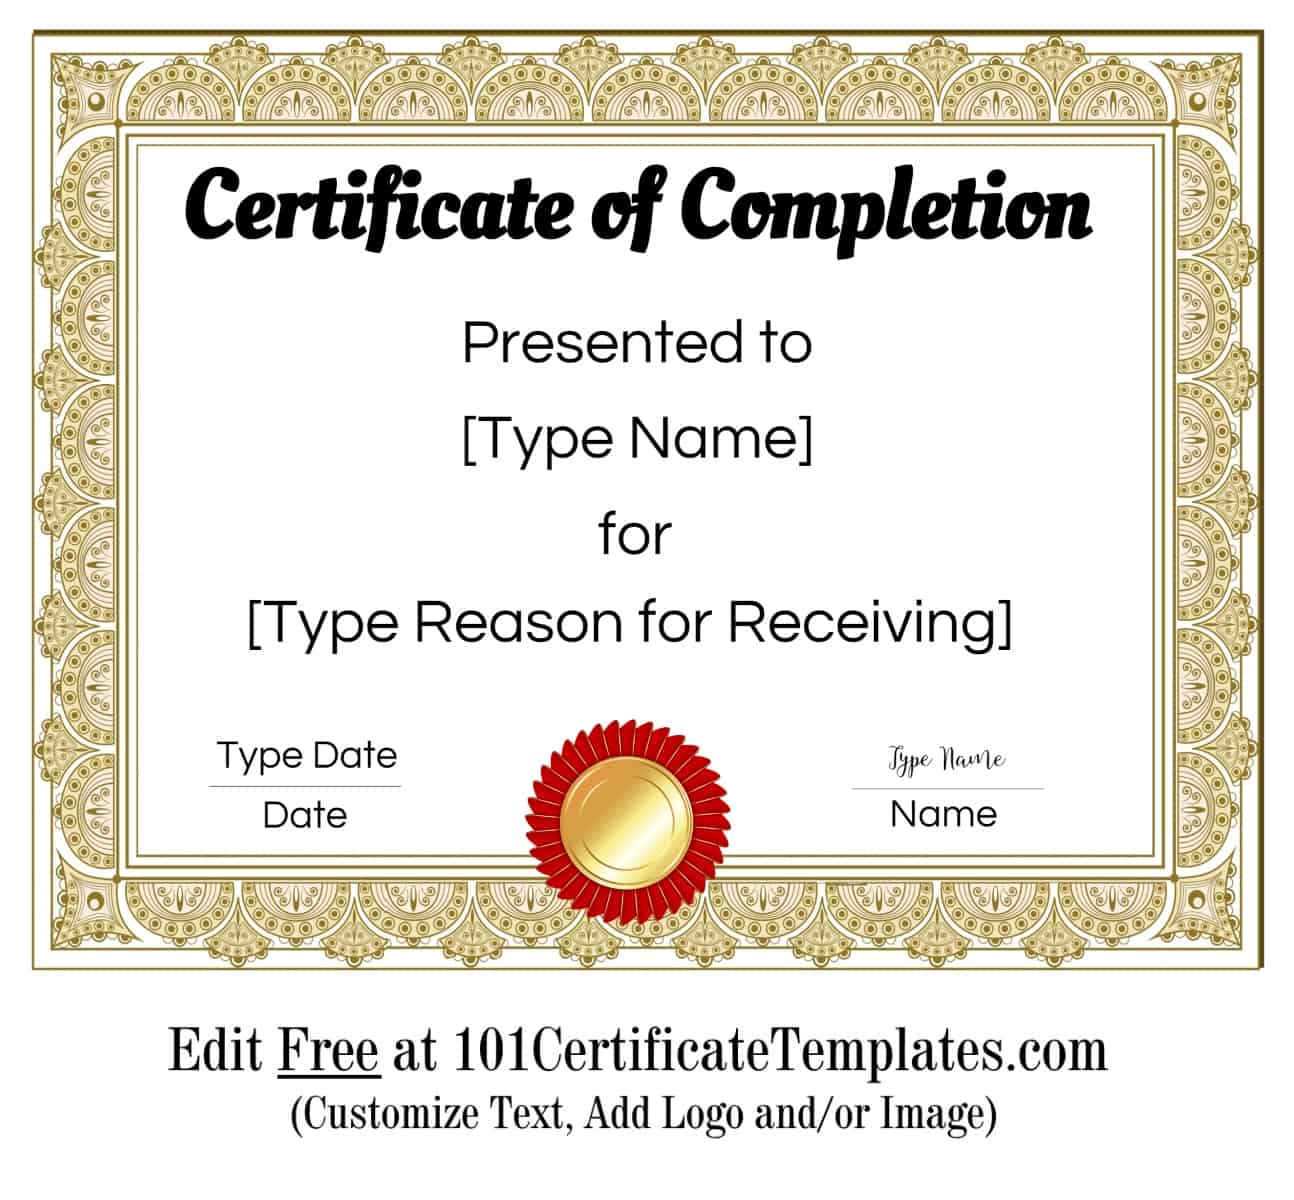 printable-certificate-of-completion-template-printable-world-holiday